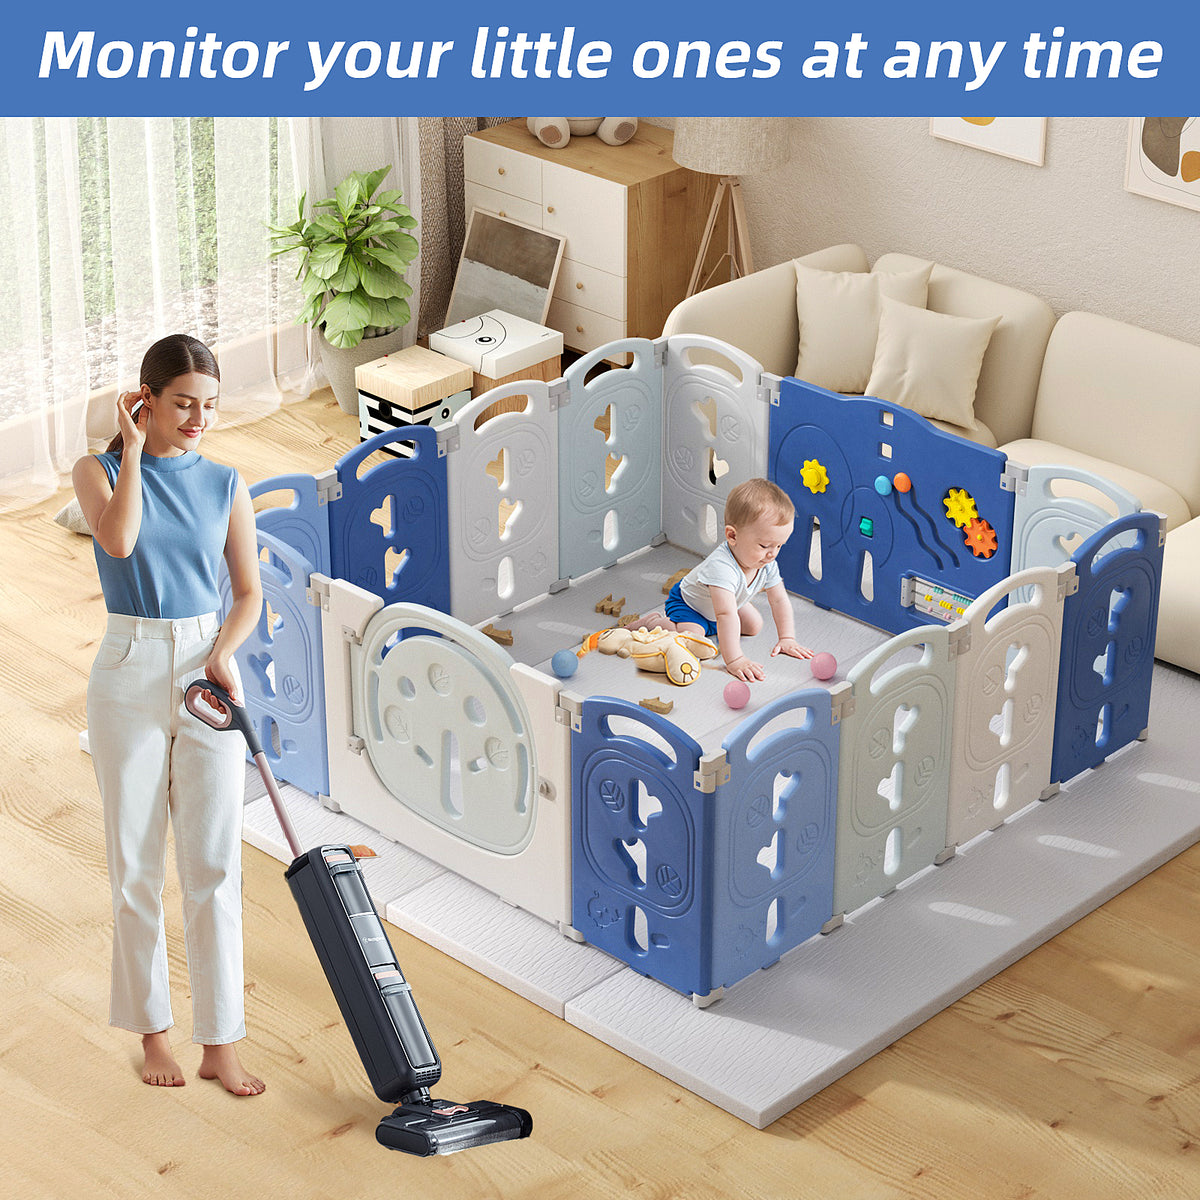 XJD Foldable Playpen for Babies, Blue Baby Safety Play Yard with Gaming Wall and Non-Slip Suction Cup